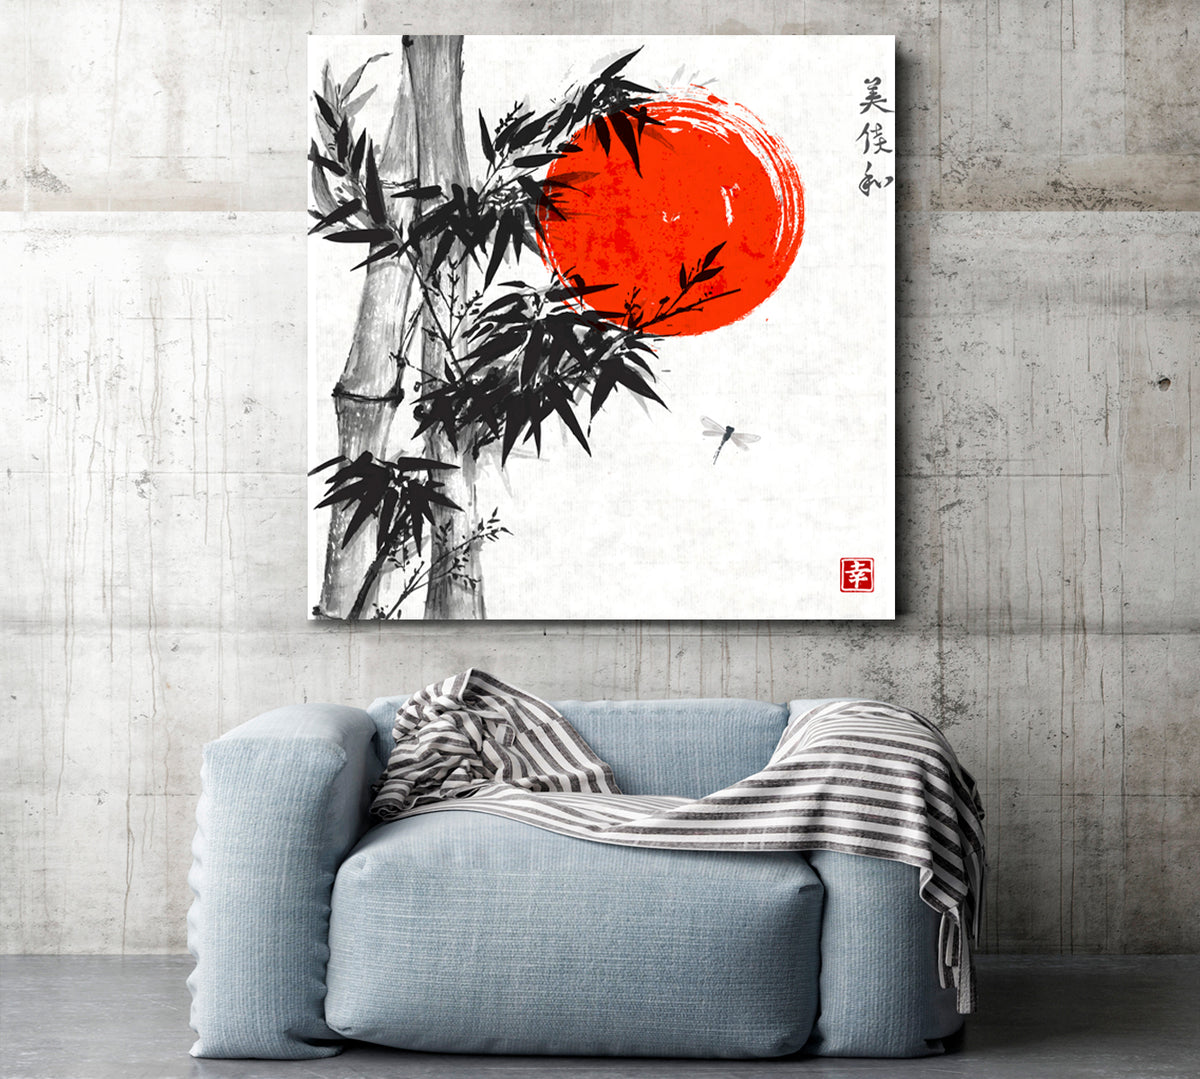 Bamboo Trees Dragongfly Red Sun Happiness Beauty Perfection Eternity - S Asian Style Canvas Print Wall Art Artesty 1 Panel 12"x12" 